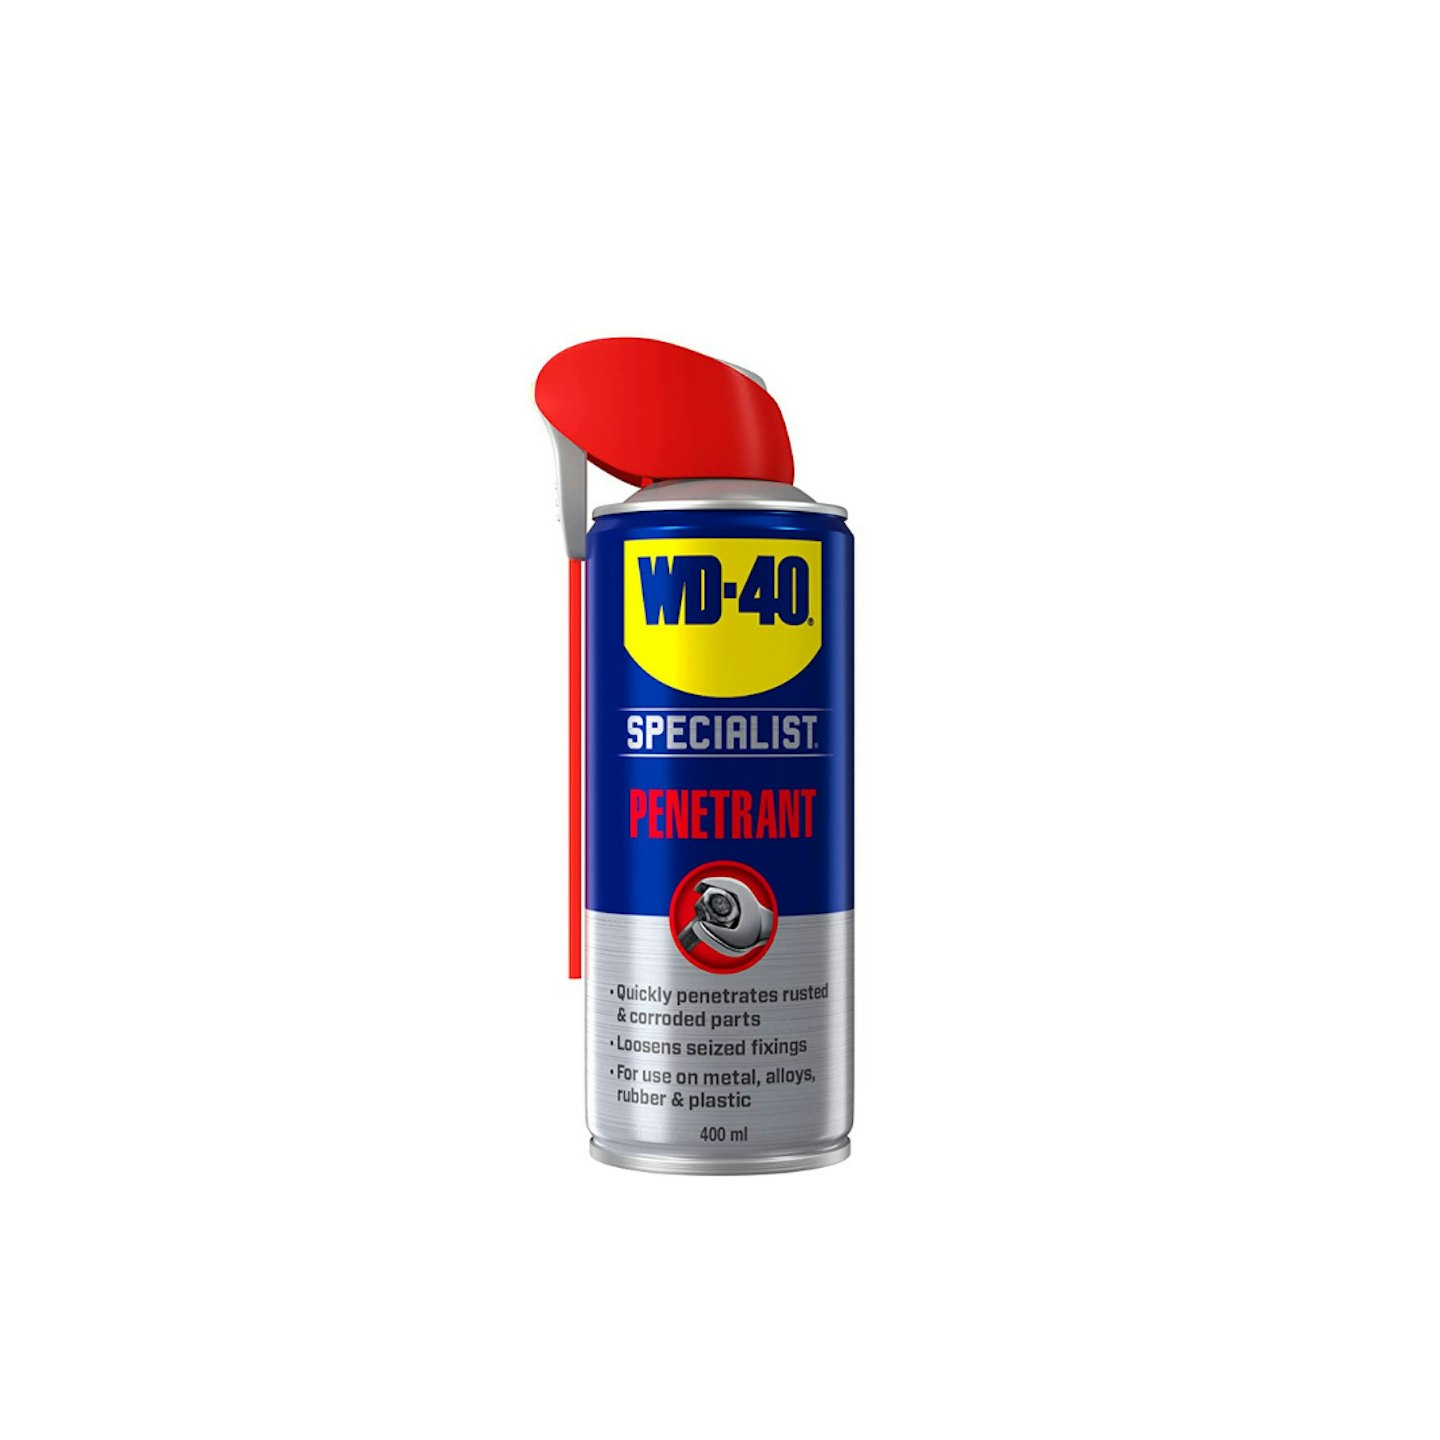 Penetrant by WD-40 Specialist